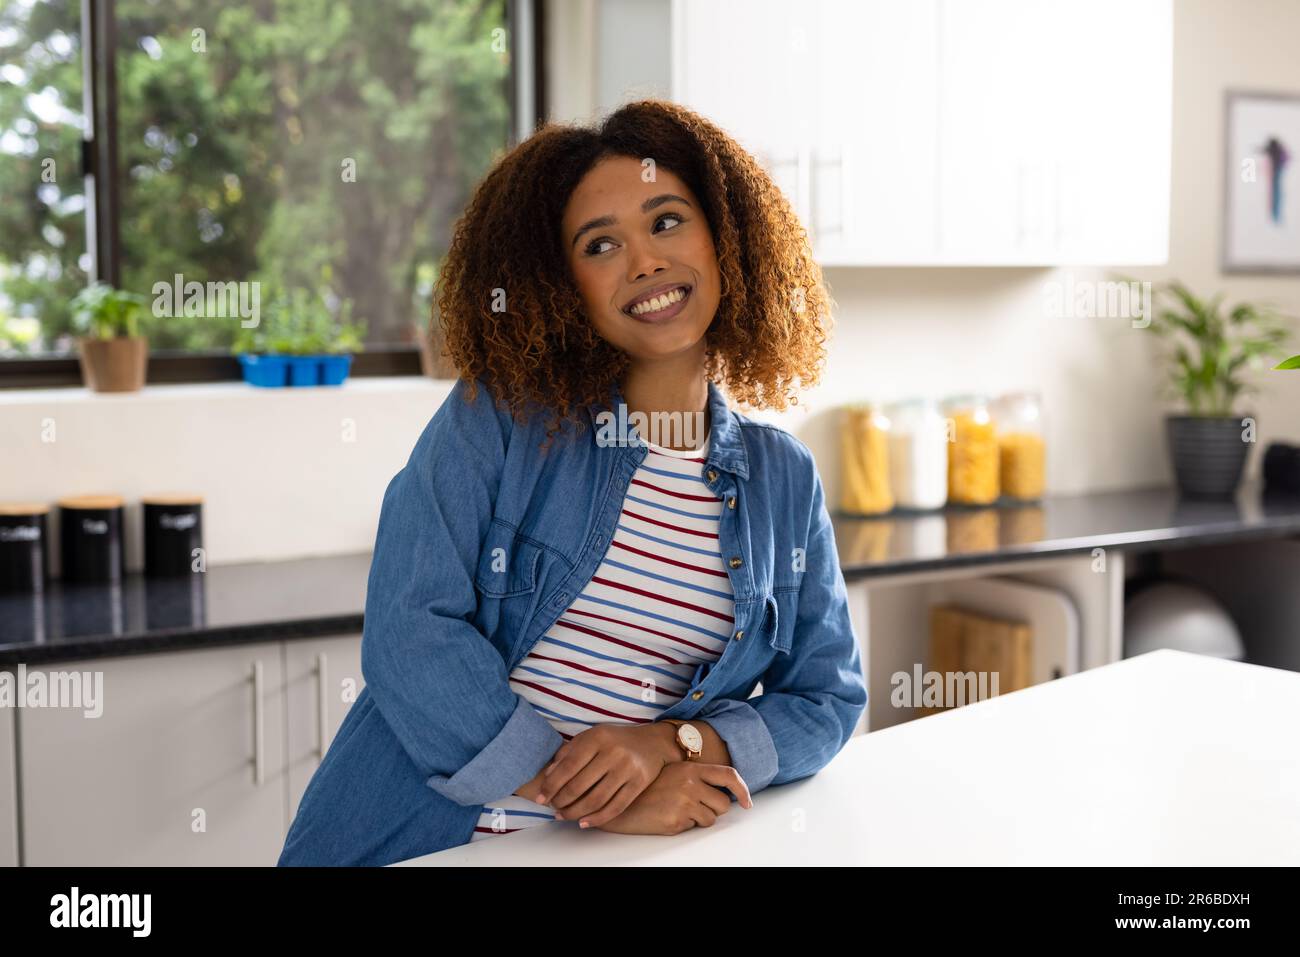 Happy biracial woman with curly hair leaning on counter smiling in kitchen Stock Photo